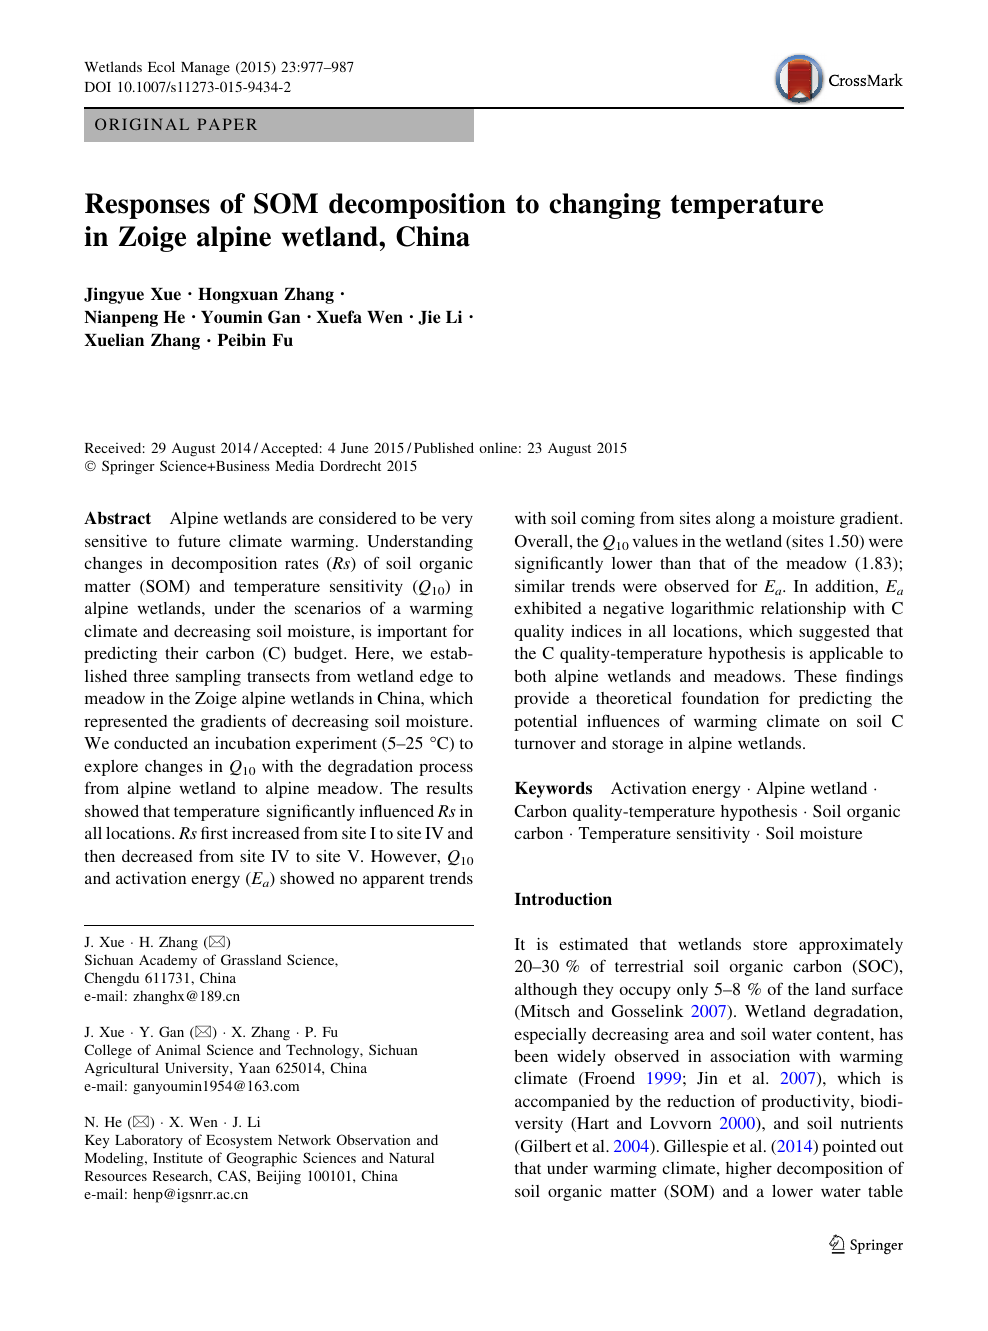 Responses Of Som Decomposition To Changing Temperature In Zoige Alpine Wetland China Topic Of Research Paper In Biological Sciences Download Scholarly Article Pdf And Read For Free On Cyberleninka Open Science